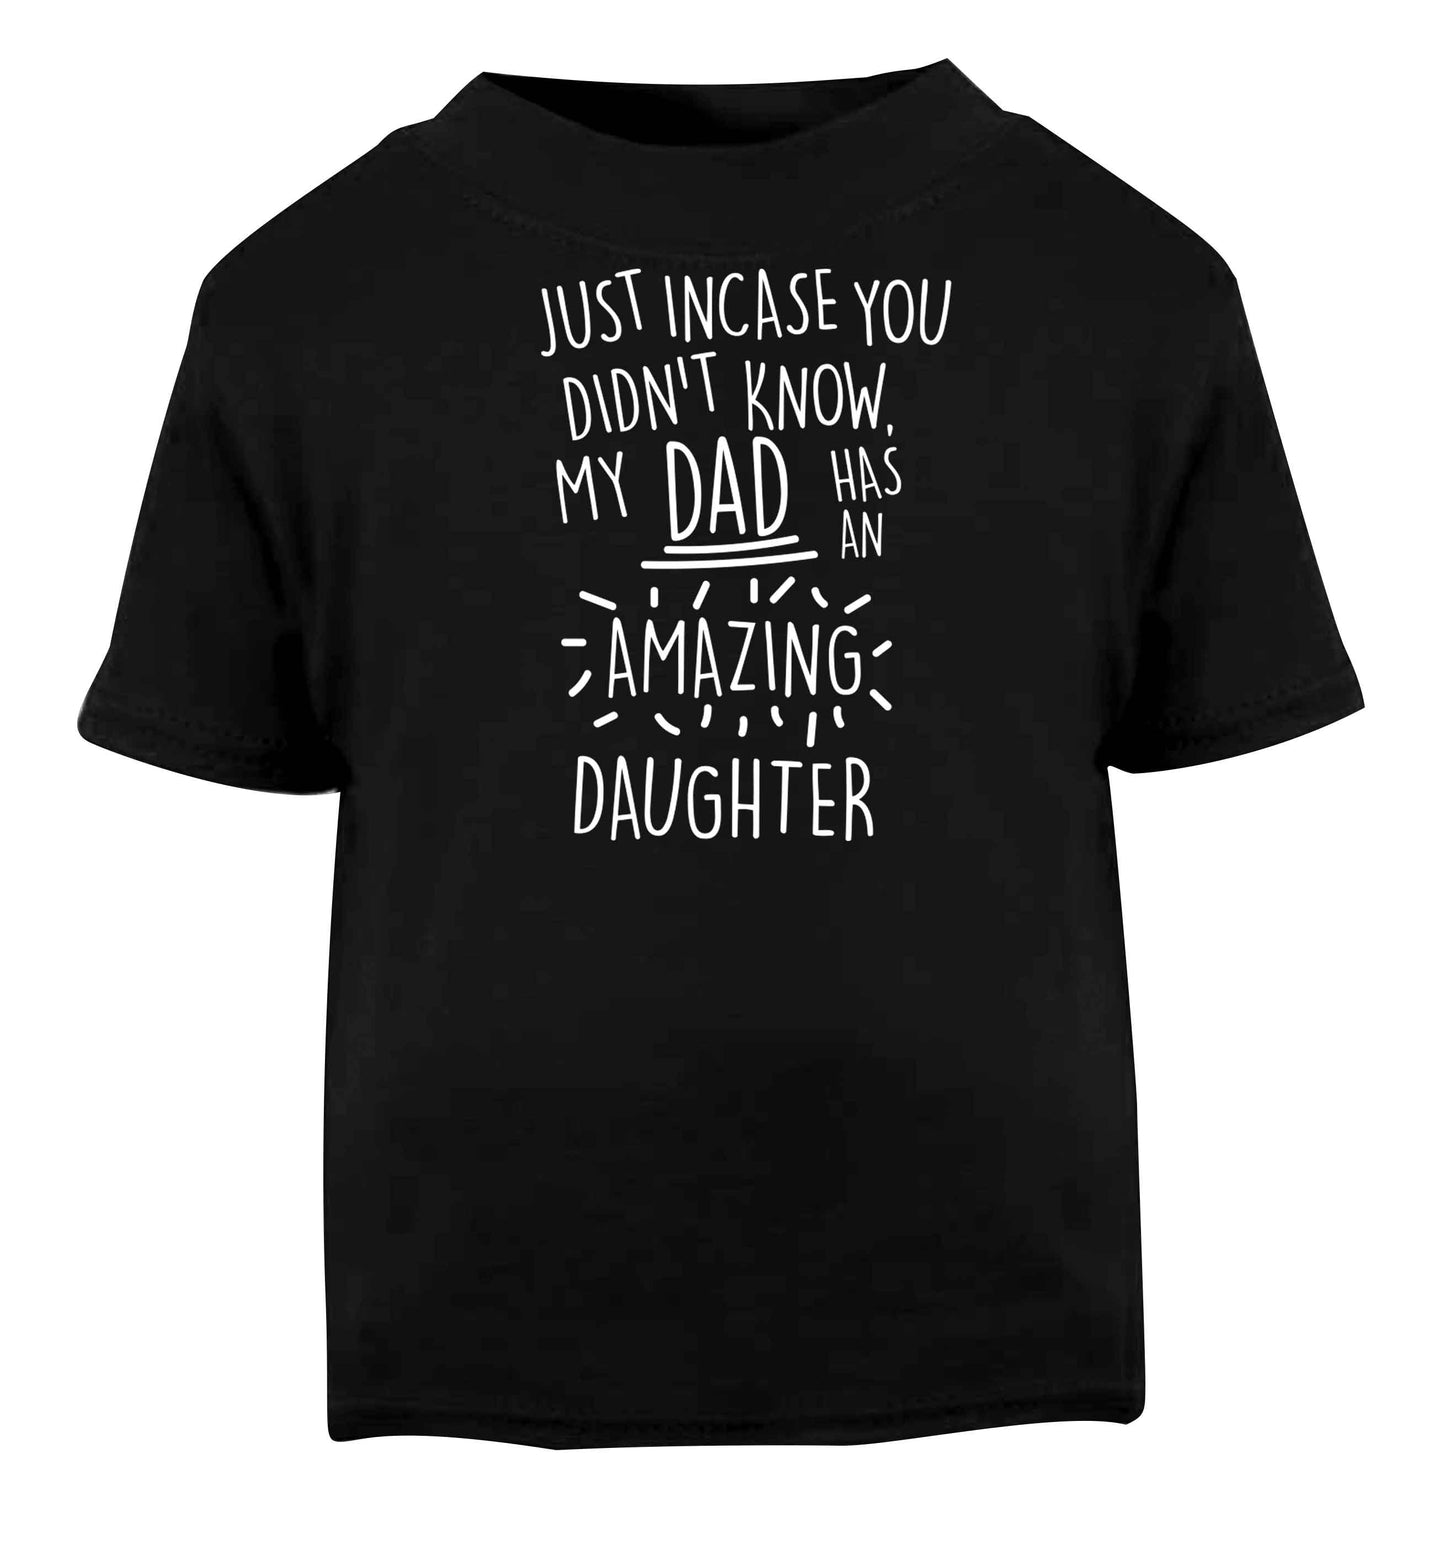 Just incase you didn't know my dad has an amazing daughter Black baby toddler Tshirt 2 years